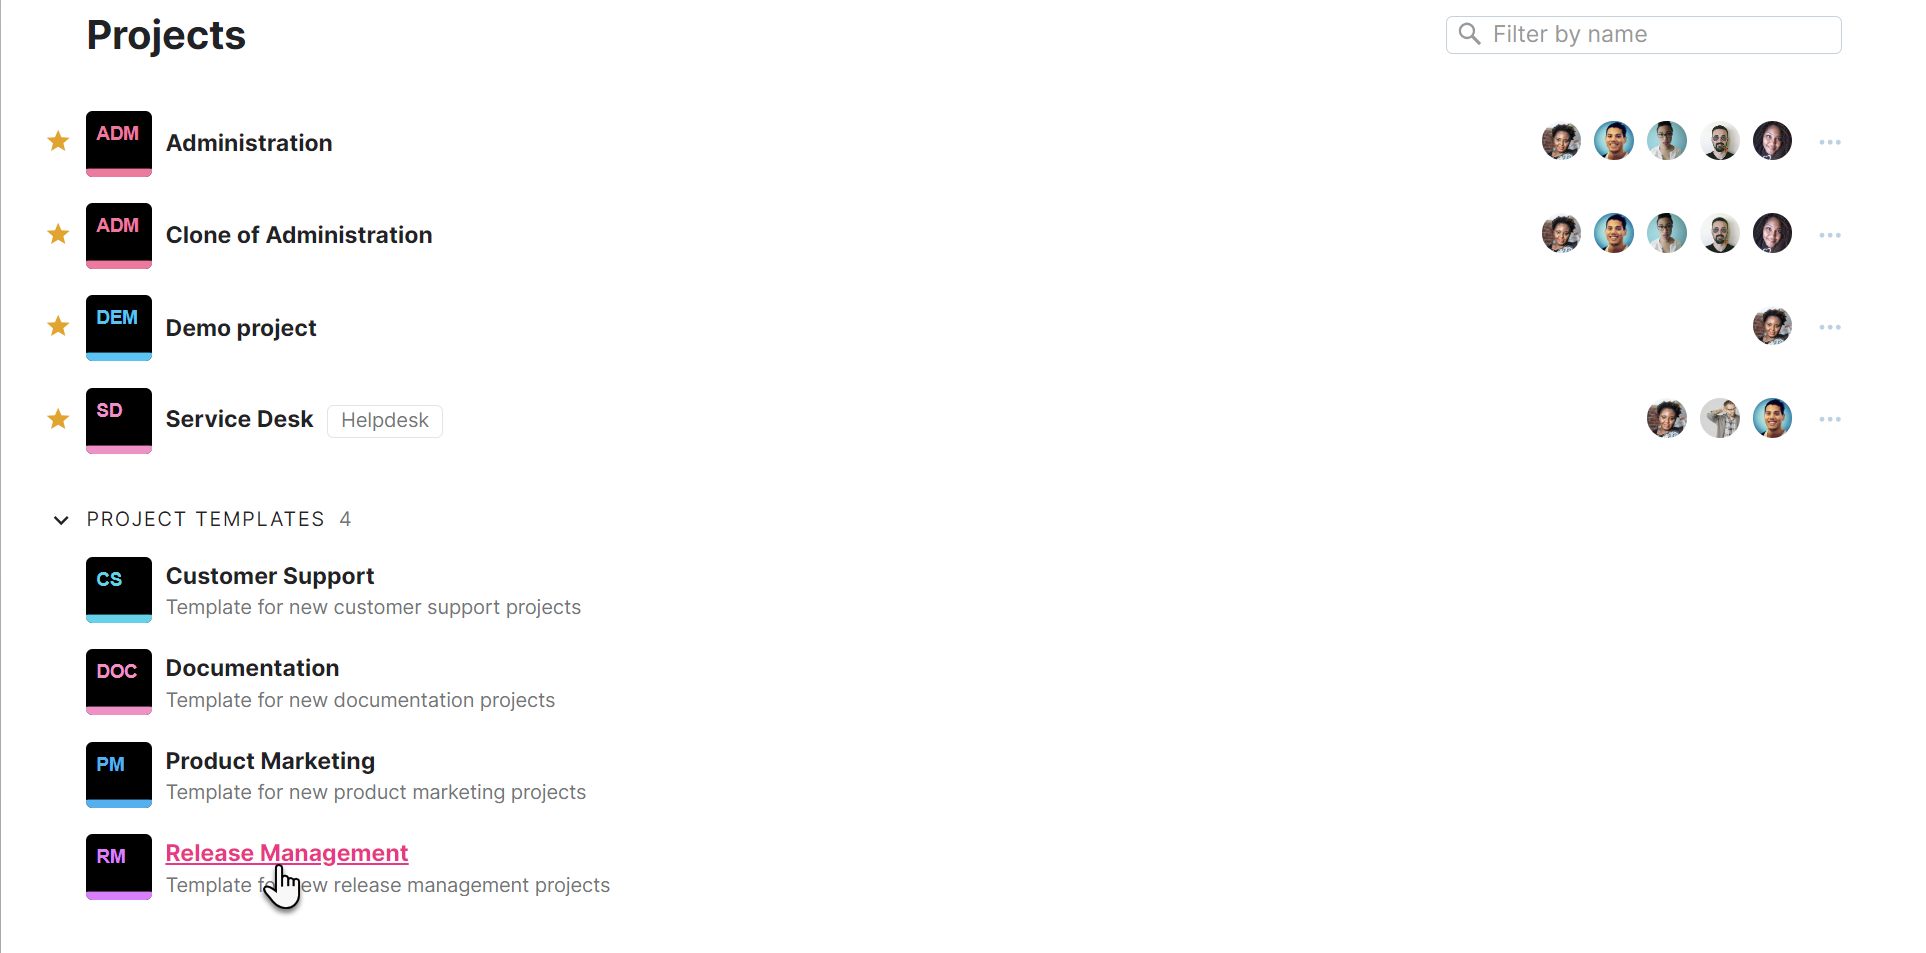 The Project Templates section of the project list.